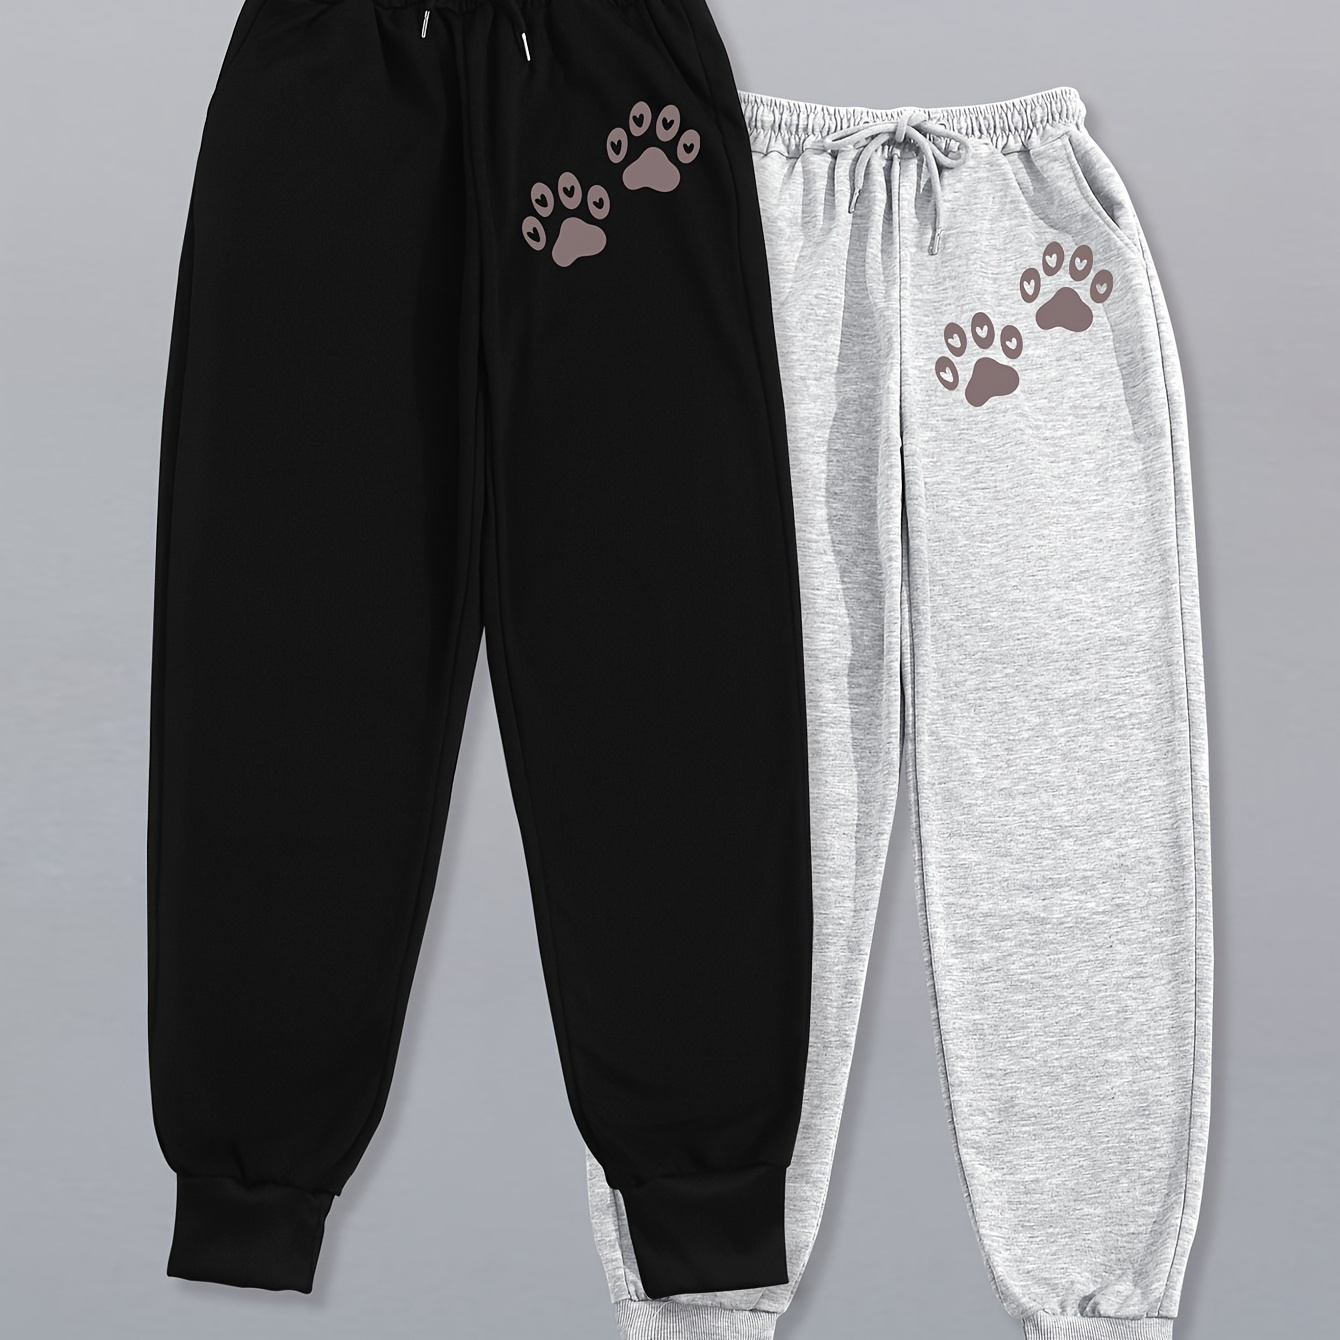 

Dog Paw Print Sweatpants 2 Pack, Drawstring Waist Casual Jogger Shorts For Spring & Fall, Women's Clothing